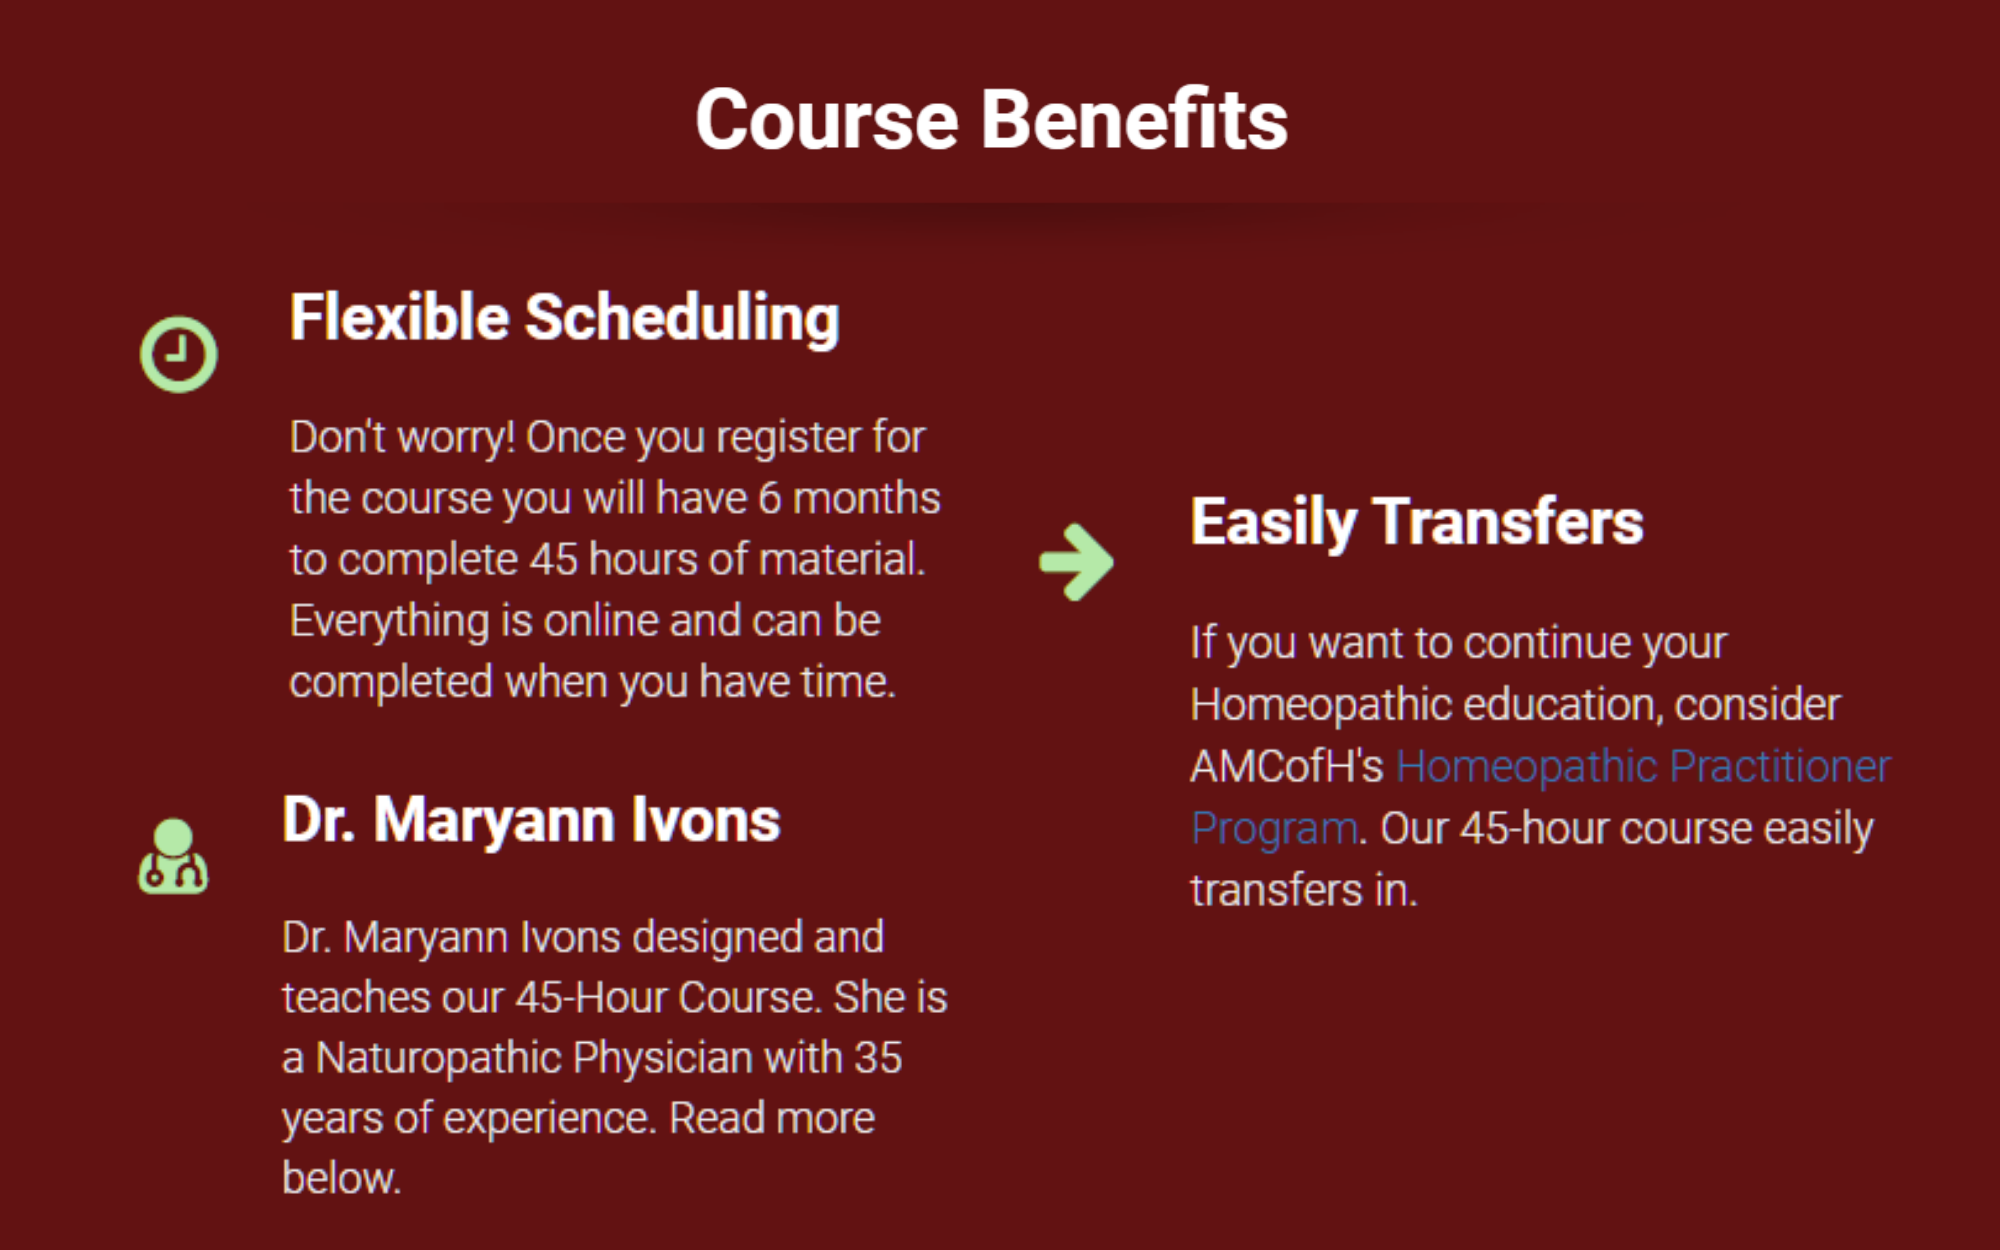 Course benefits: flexible scheduling, Dr. Maryann Ivons, and Easily Transfers to Practitioner Program